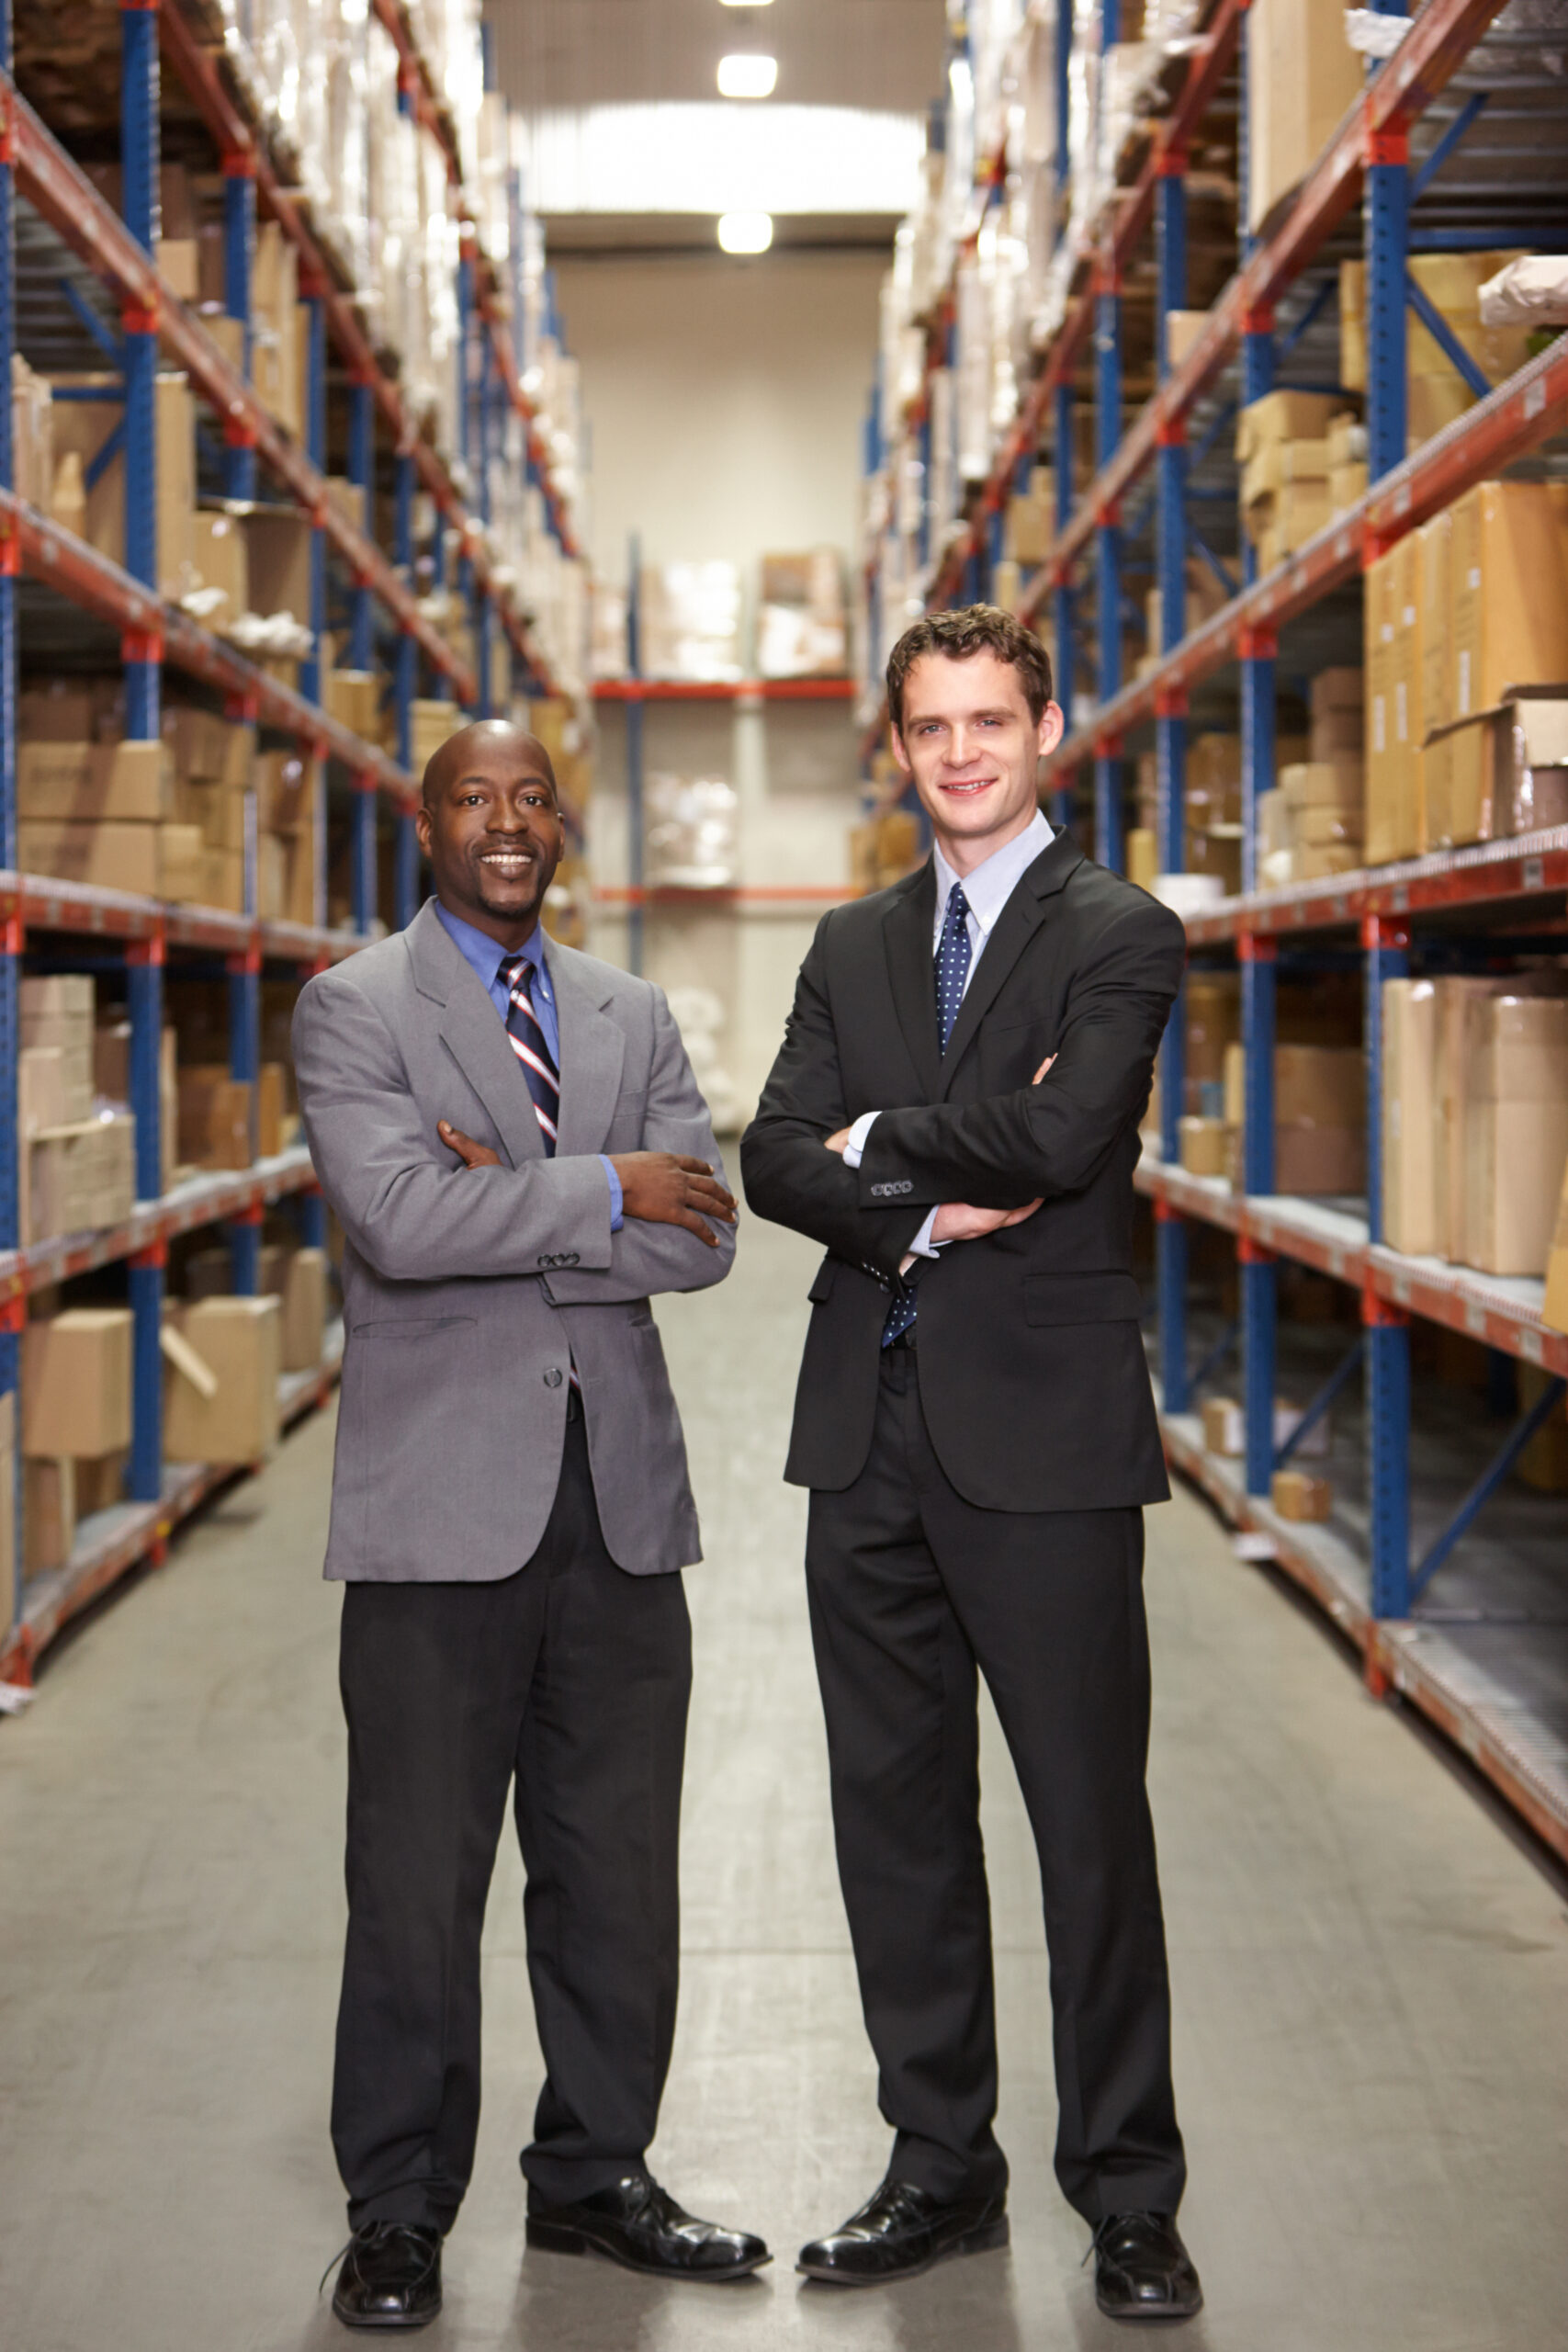 Portrait Of Two Businessmen standing In a warehouse.